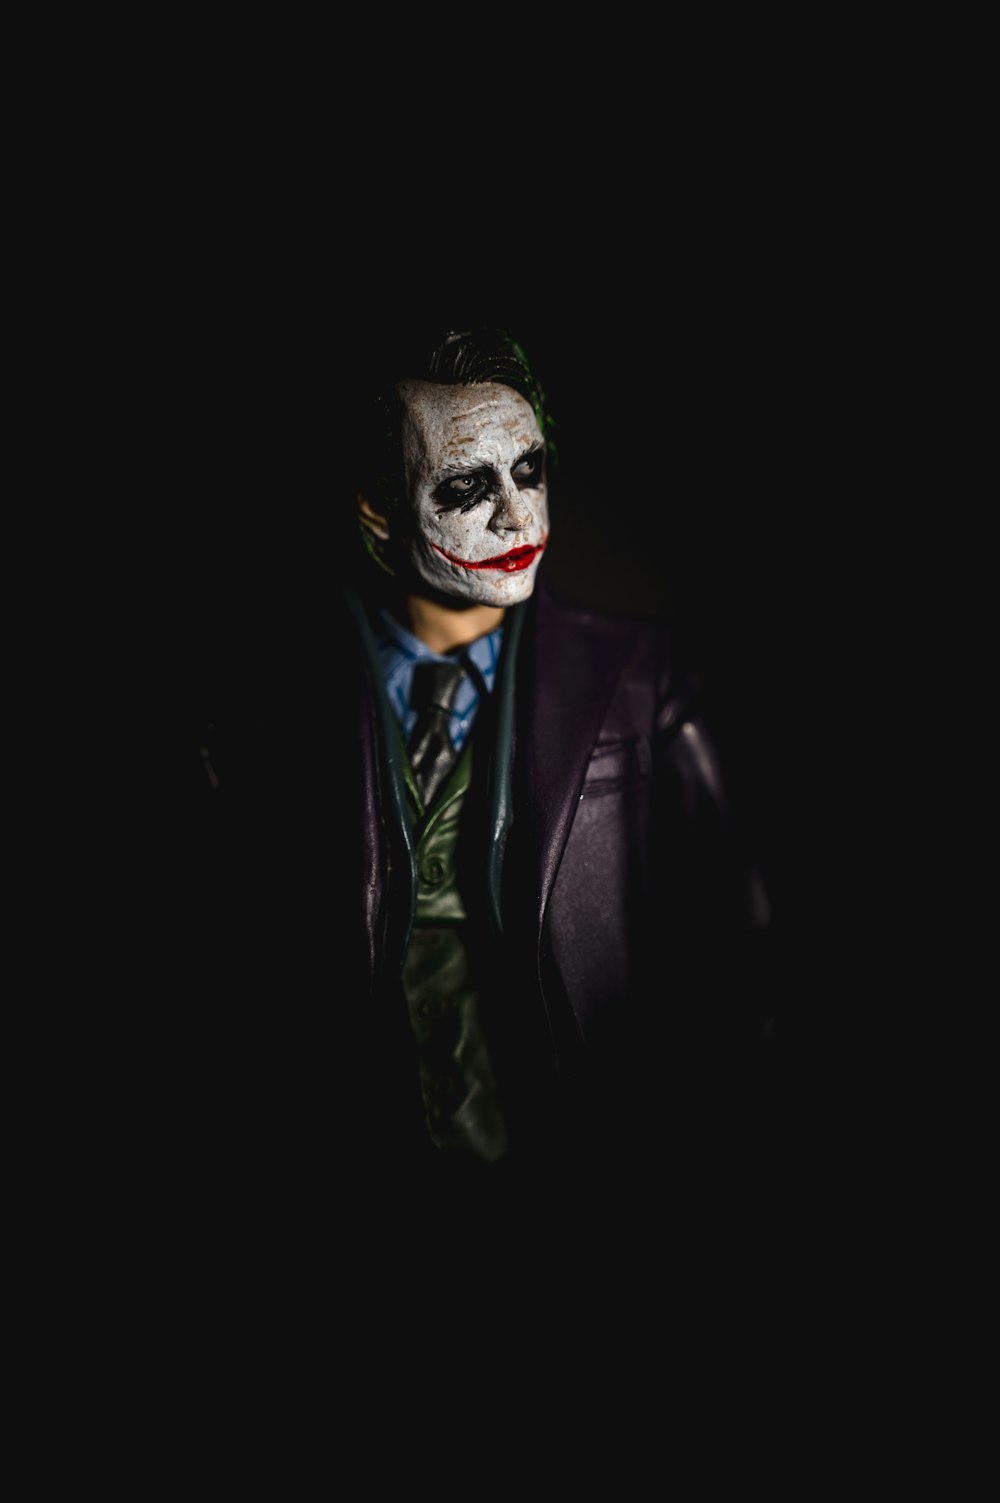 The Ultimate Collection of Joker Images HD – Top 999+ Stunning Joker Images HD in Full 4K